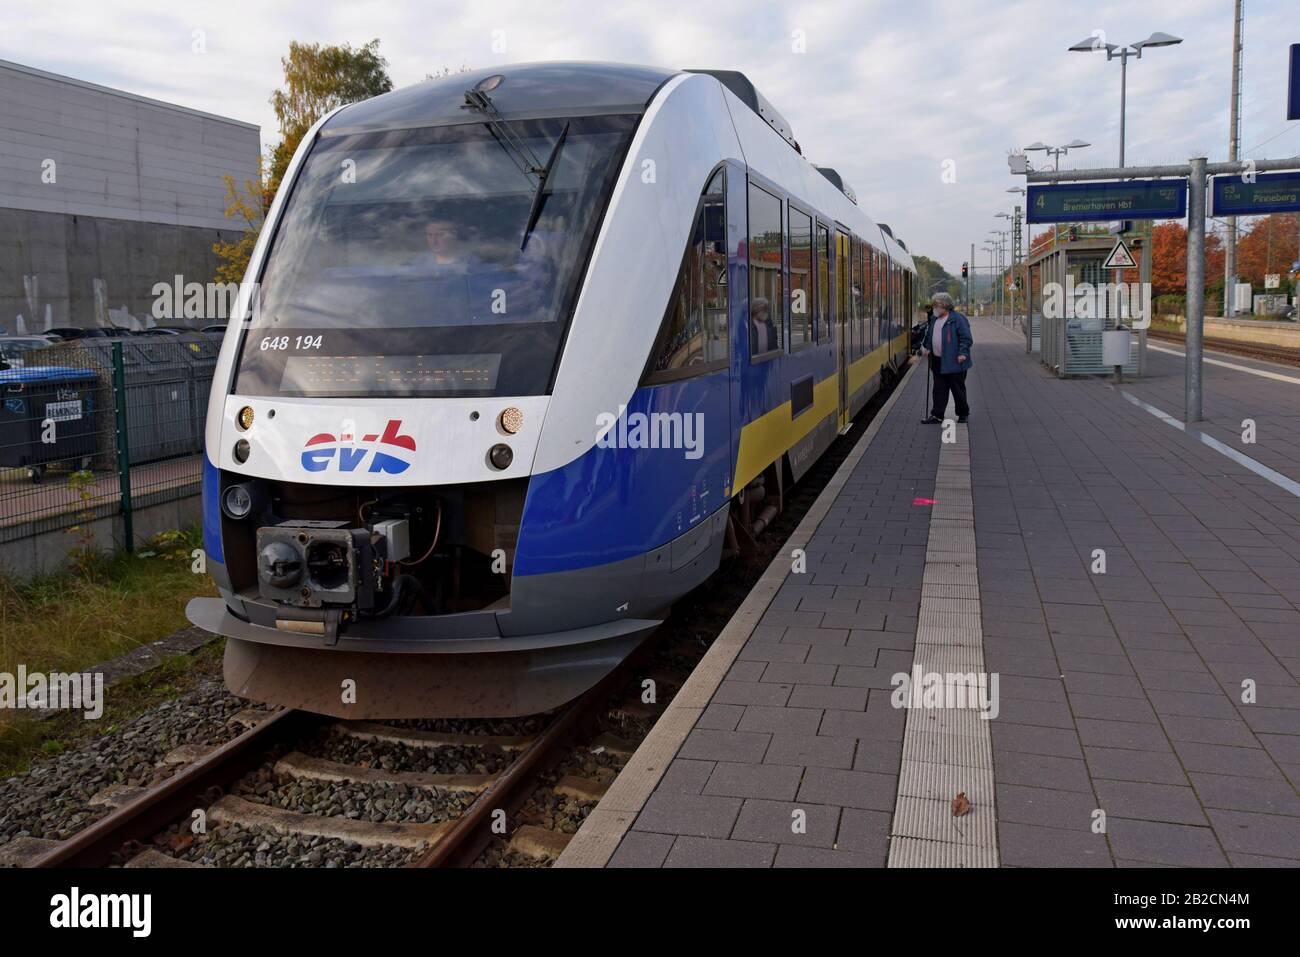 Coradia LINT 41 built by Alstom, operated by EVB at Bremervorde station, Germany Stock Photo